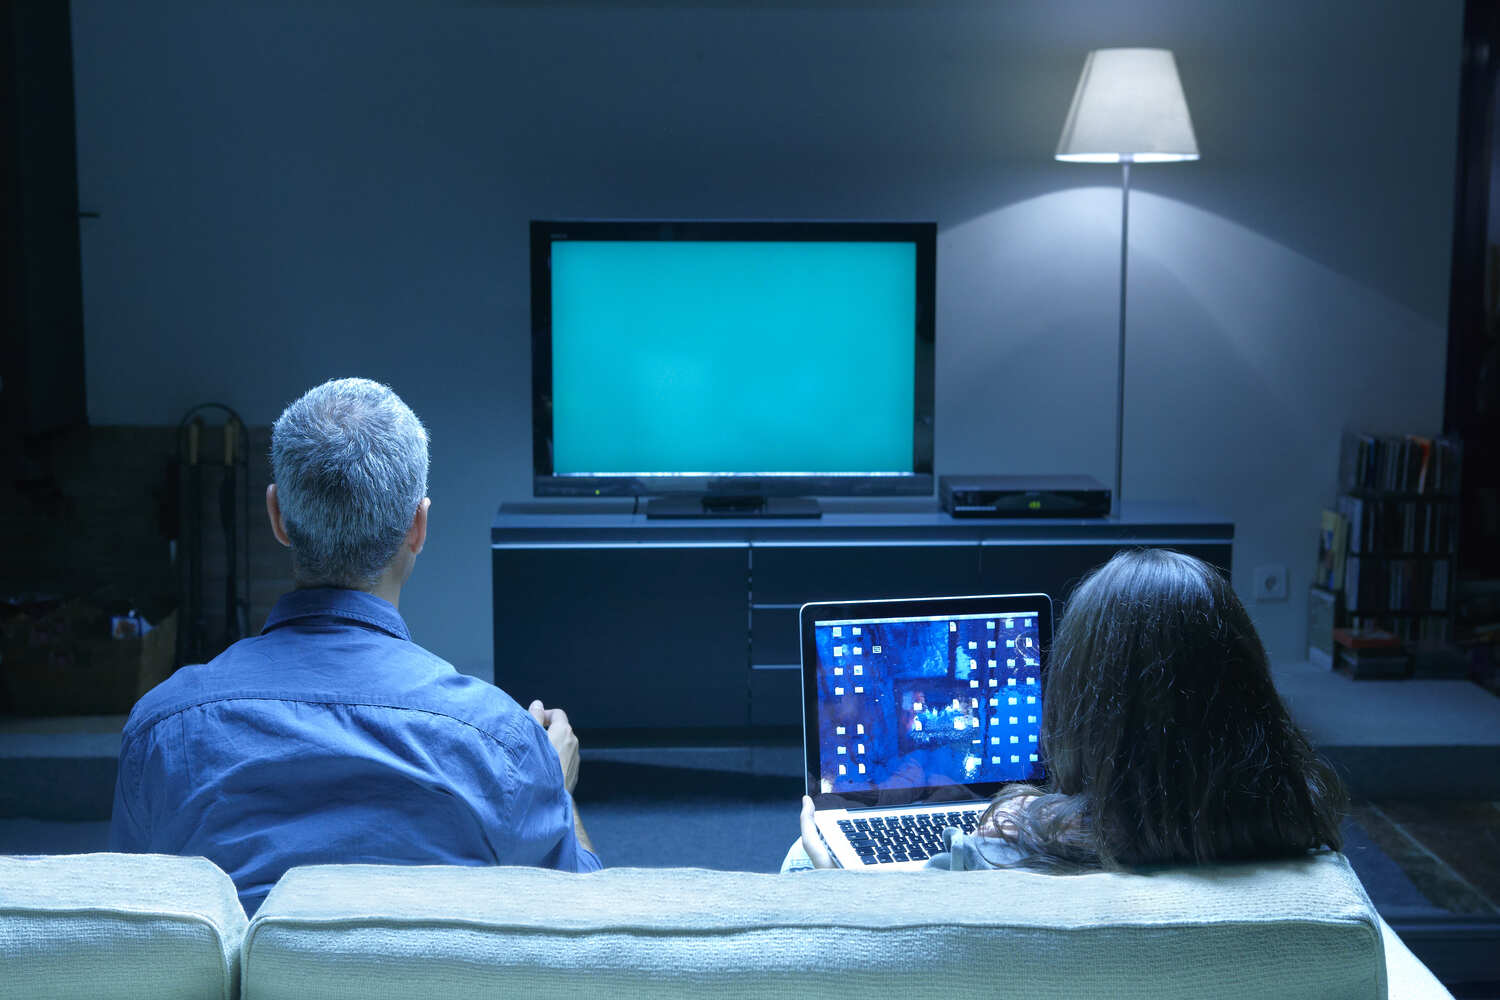 Parents need to exercise control if they want their toddler to stay away from TV